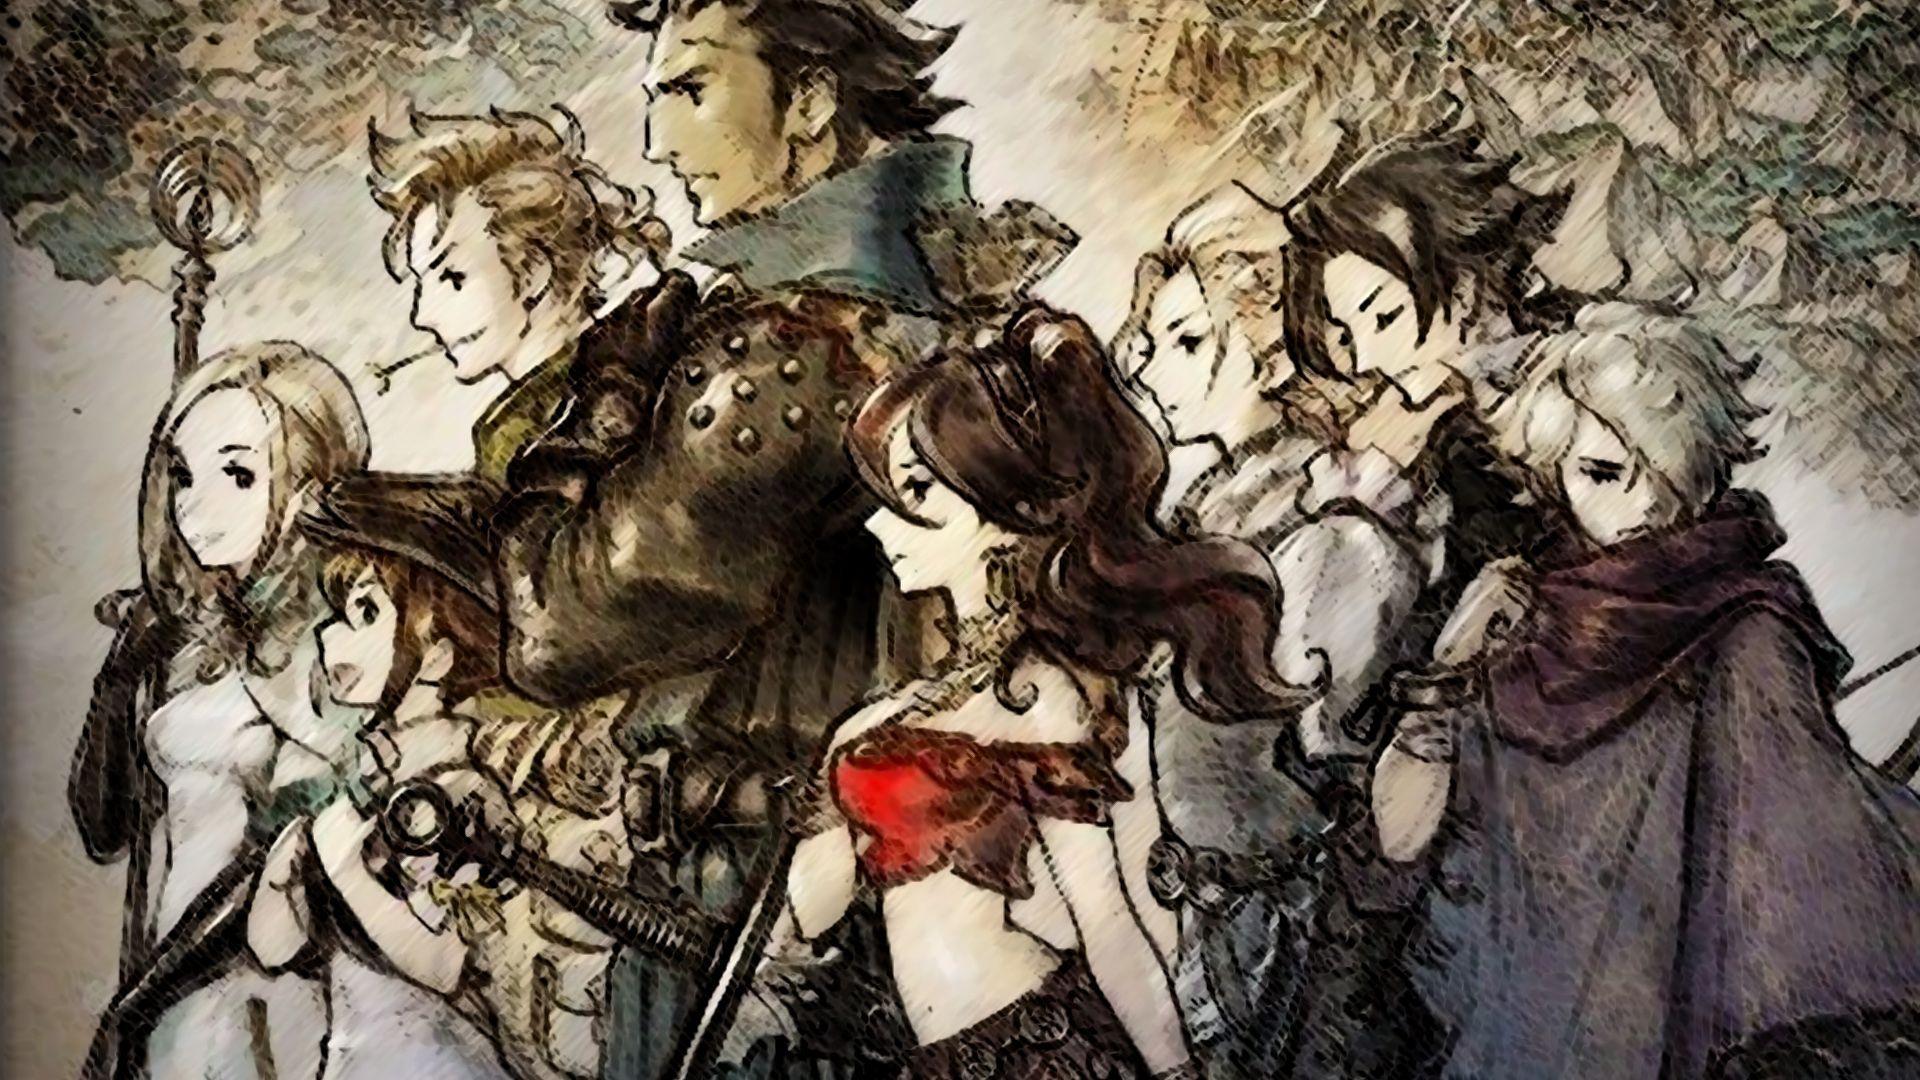 download octopath traveler champions of the continent beginner guide